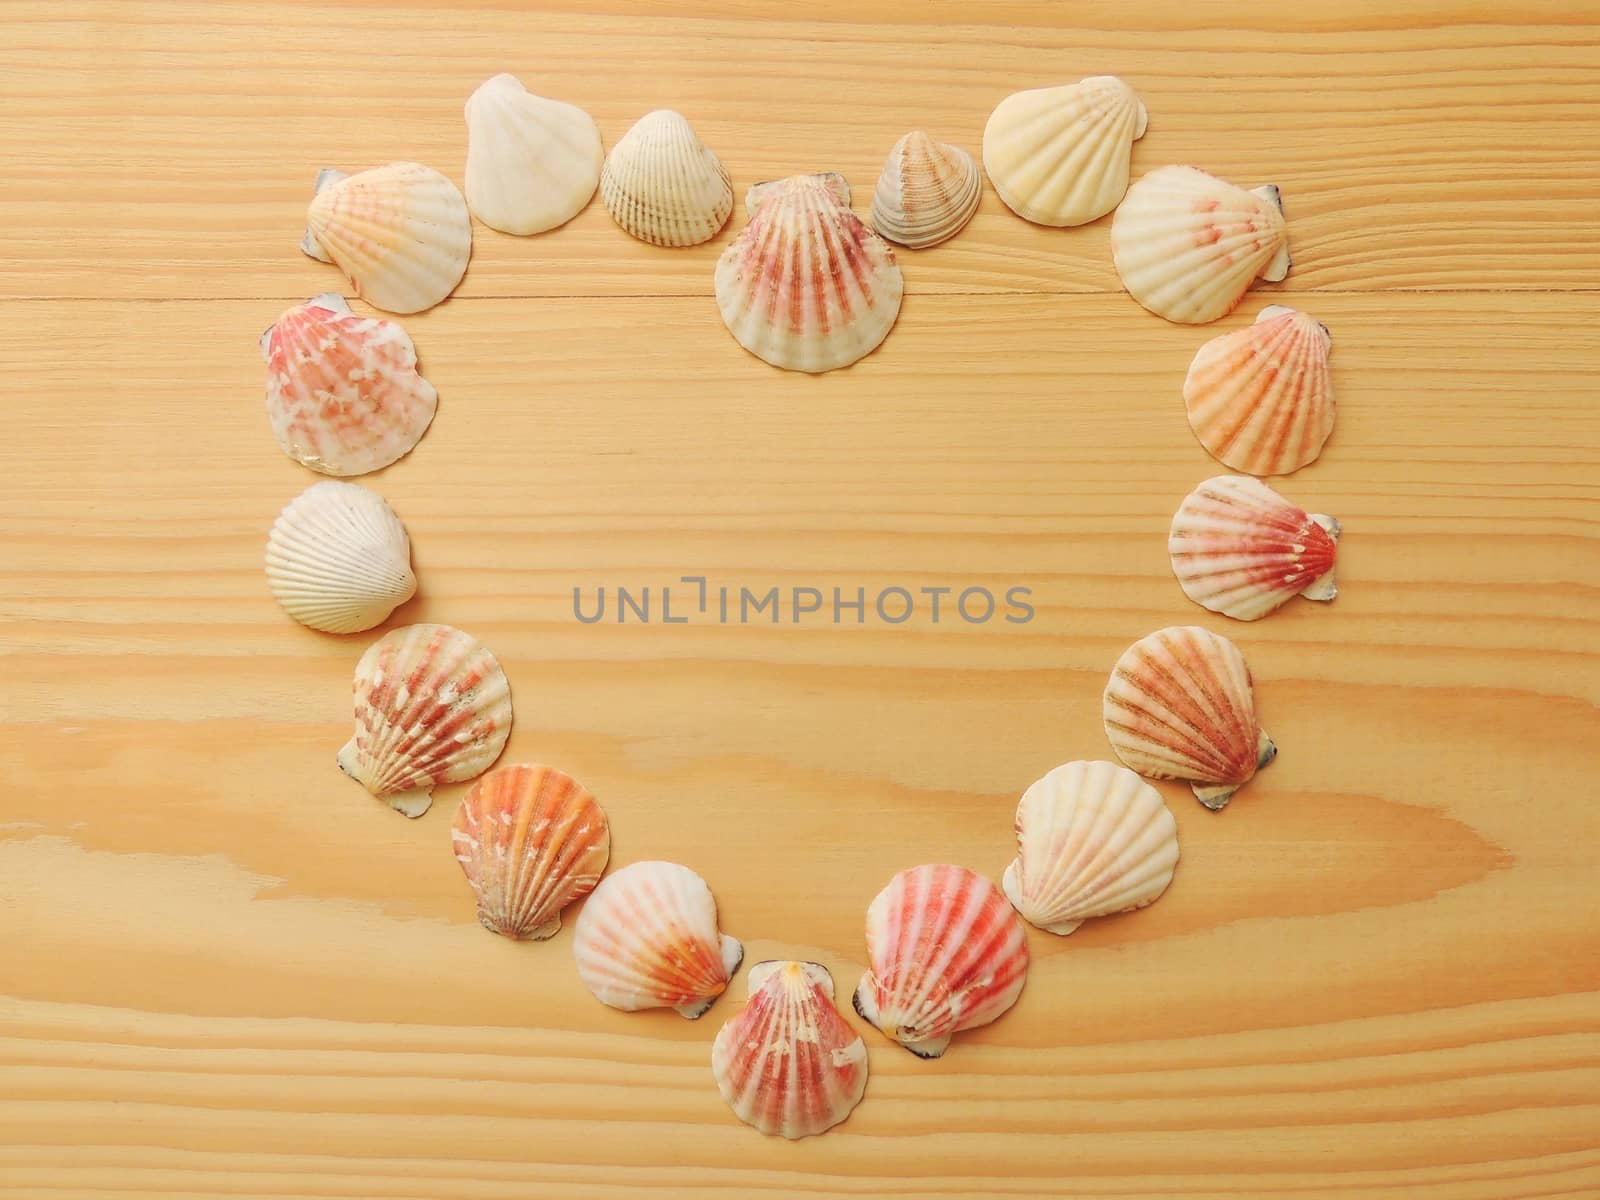 Heart of seashells on a wooden background.